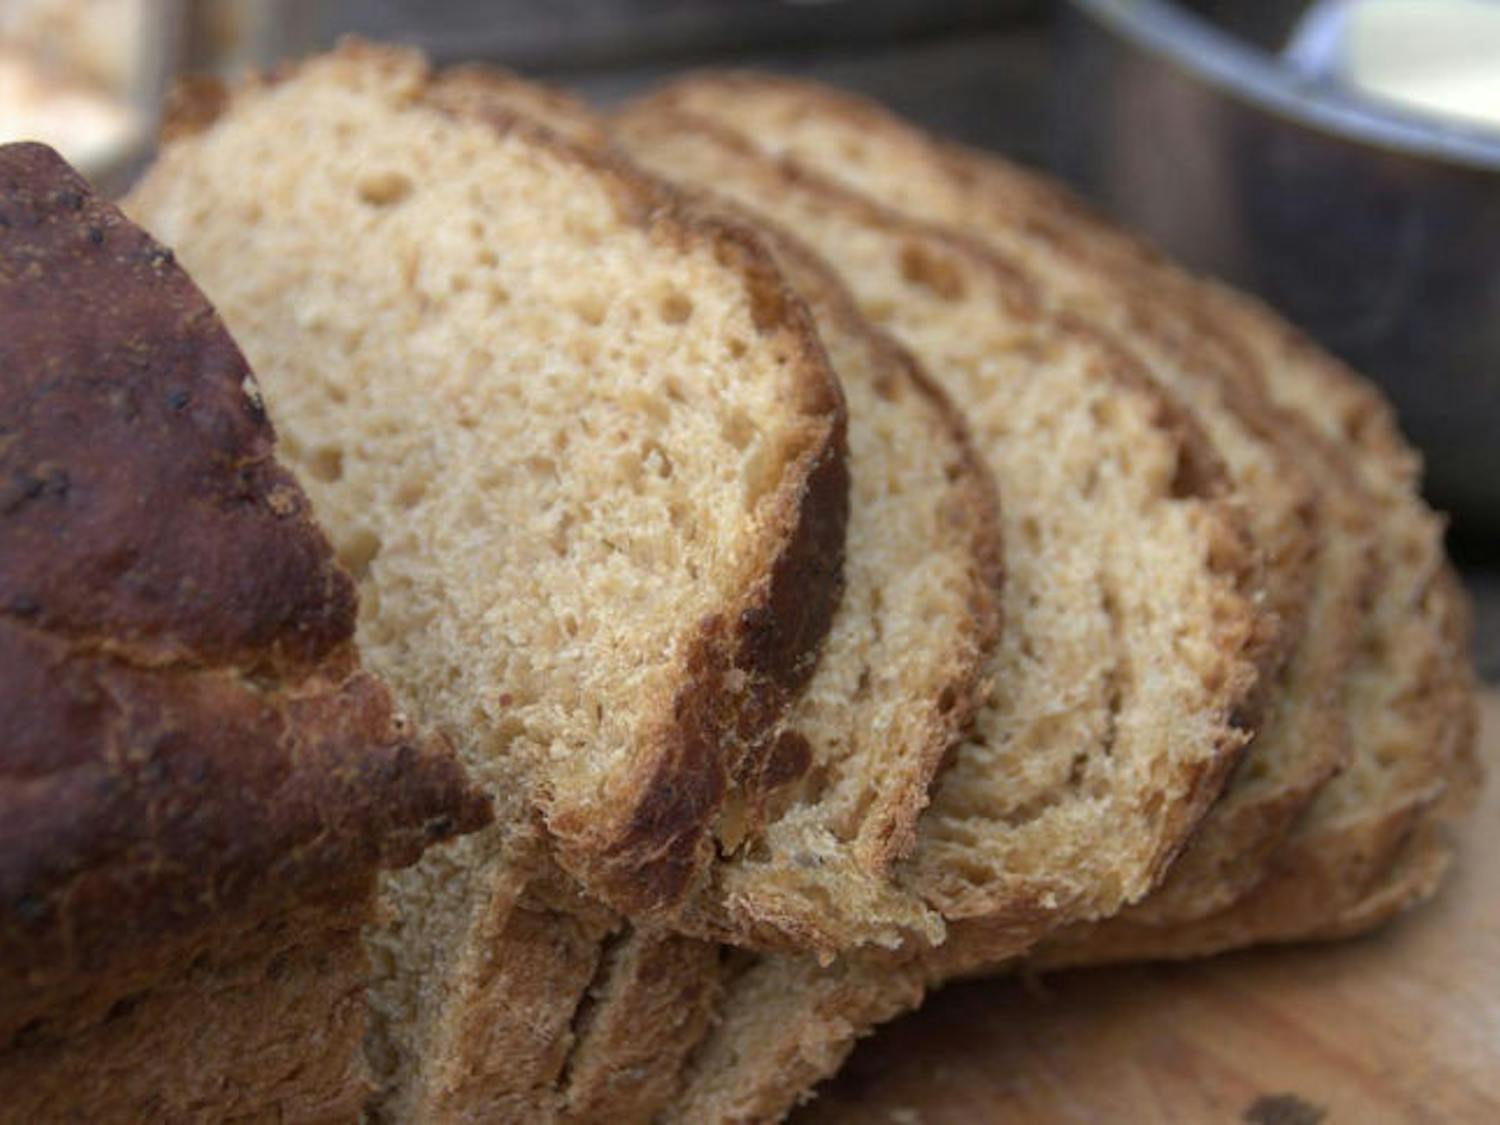 "Dani's Brown Bread" by Alexa Clark, used under CC BY-NC 2.0